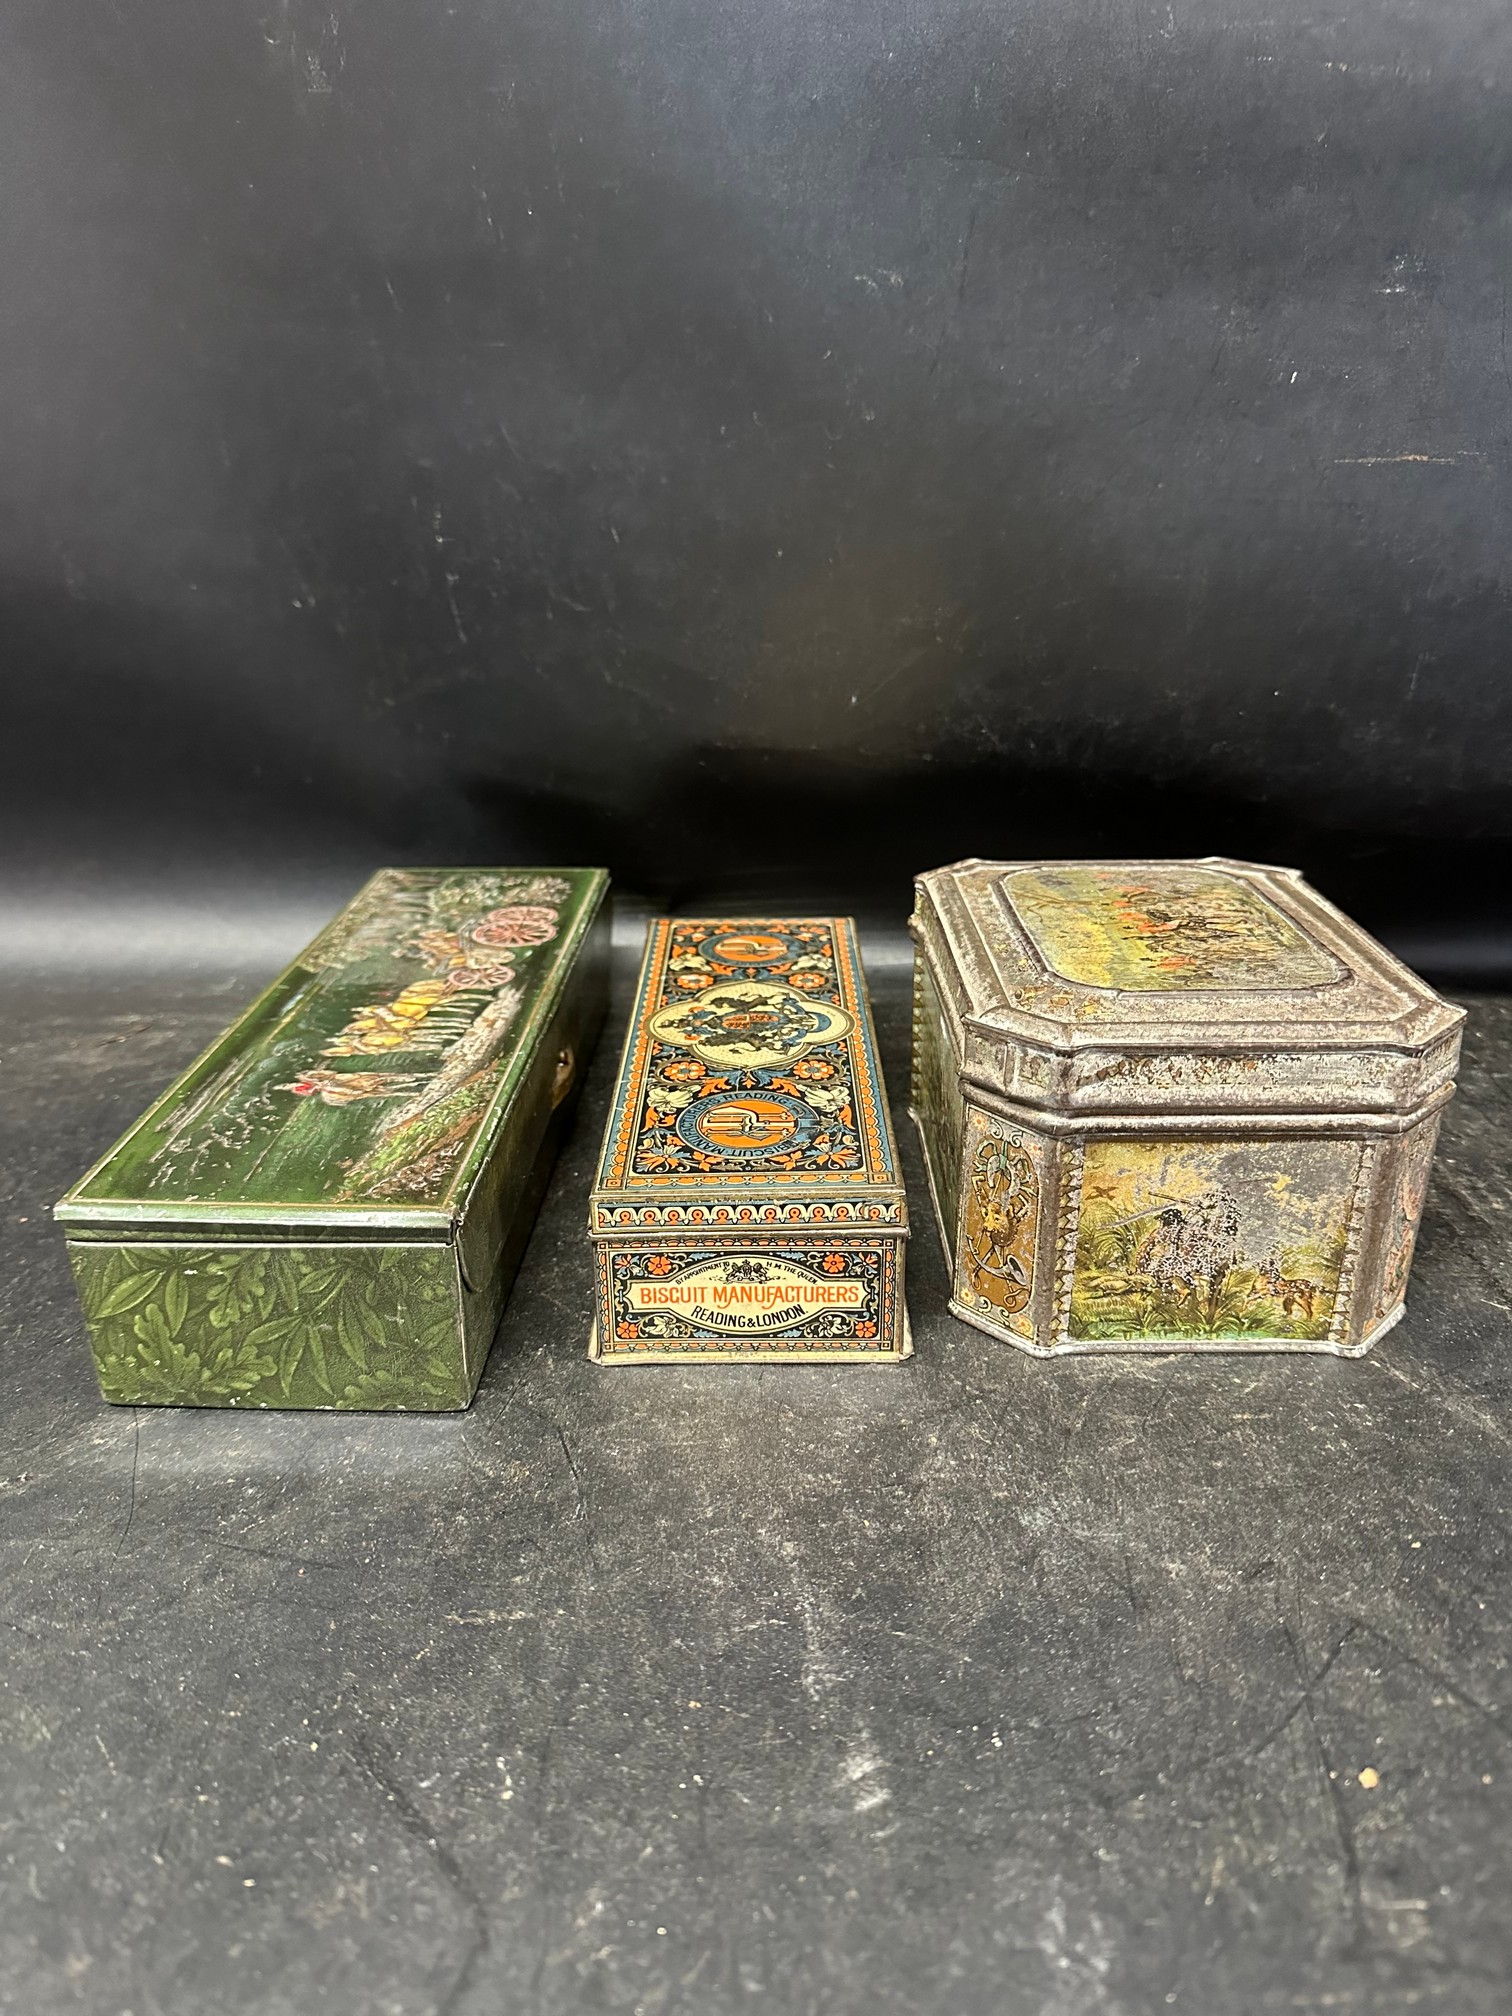 Three Huntley & Palmer's Ltd. confectionery tins including hunting scenes, horse and carts etc. - Image 7 of 9